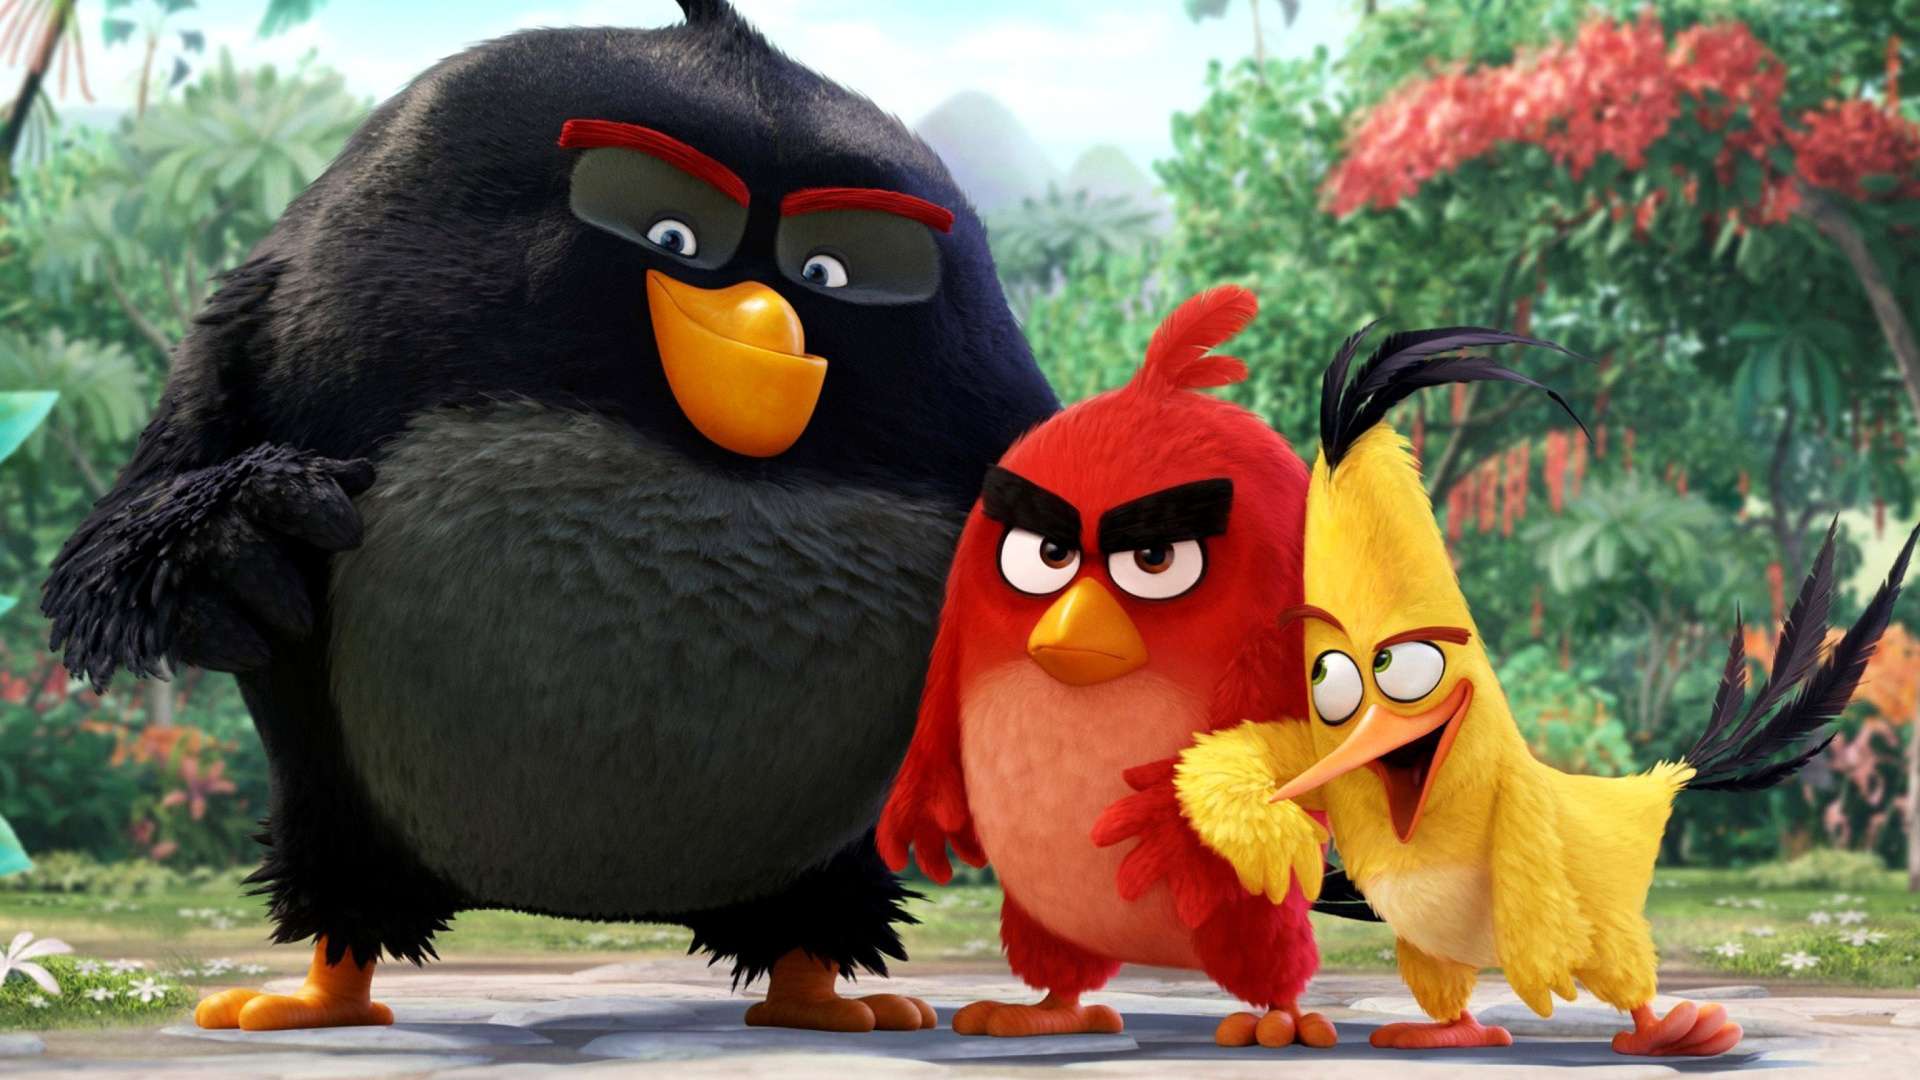 The Angry Birds Comedy Movie 2016 wallpaper 1920x1080